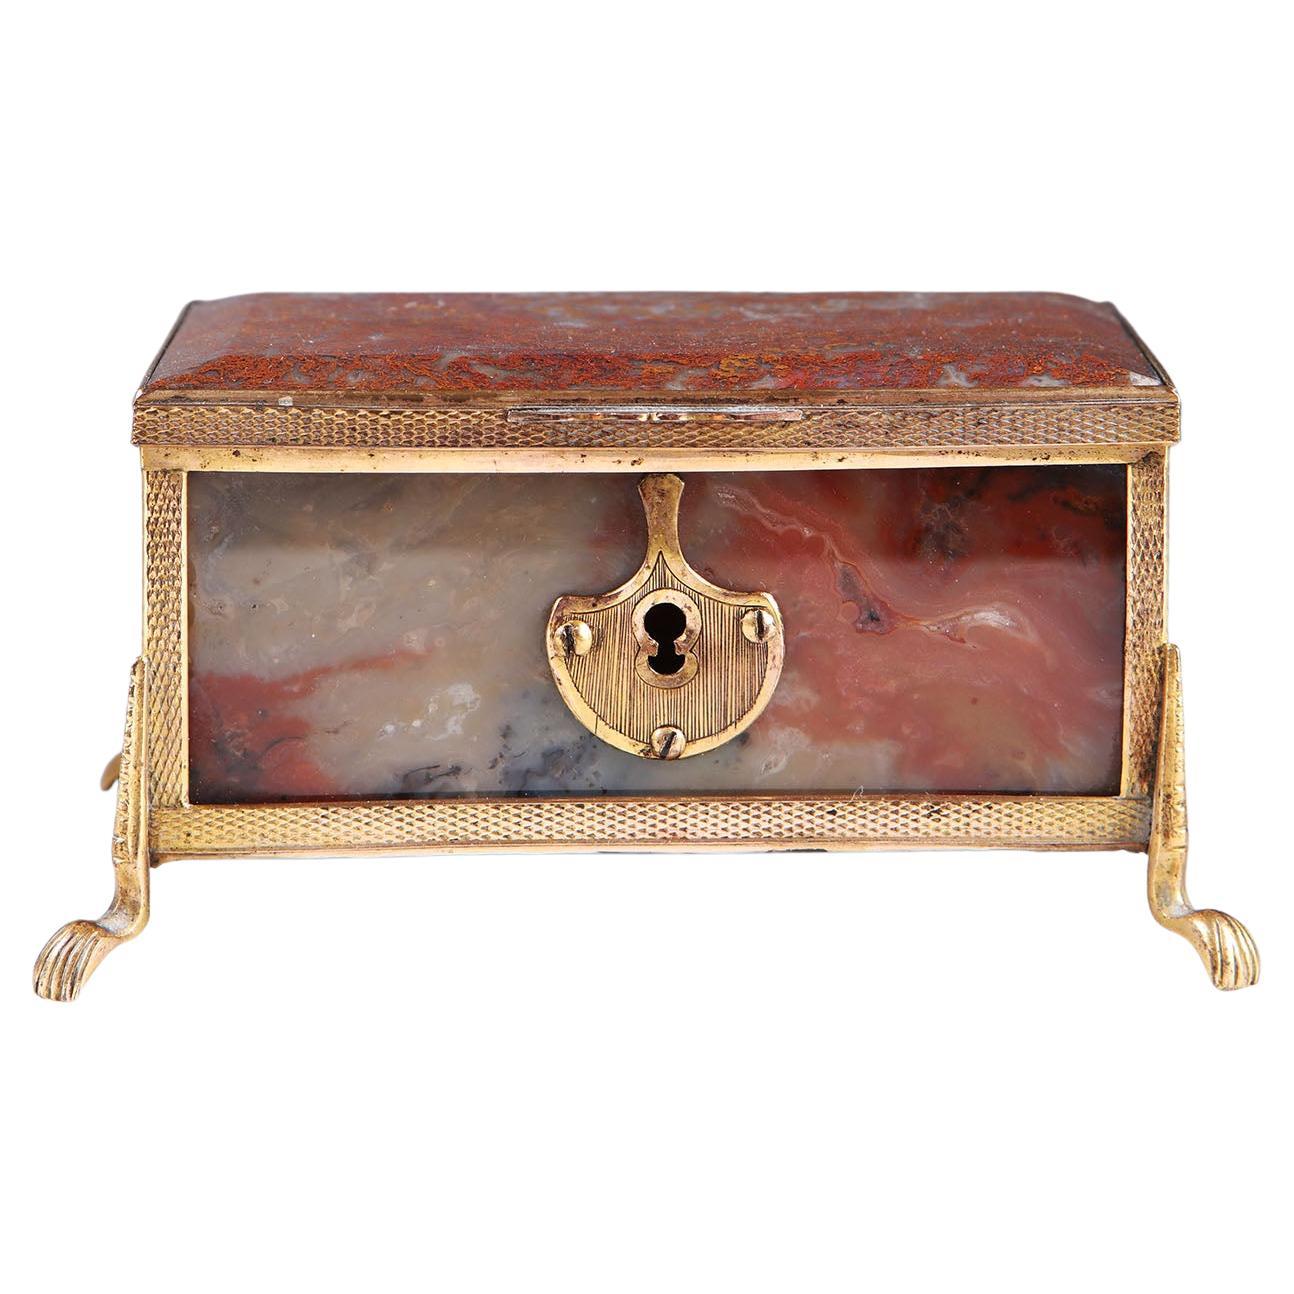 19th Century Burnished Agate and Gold Plated Metal Casket